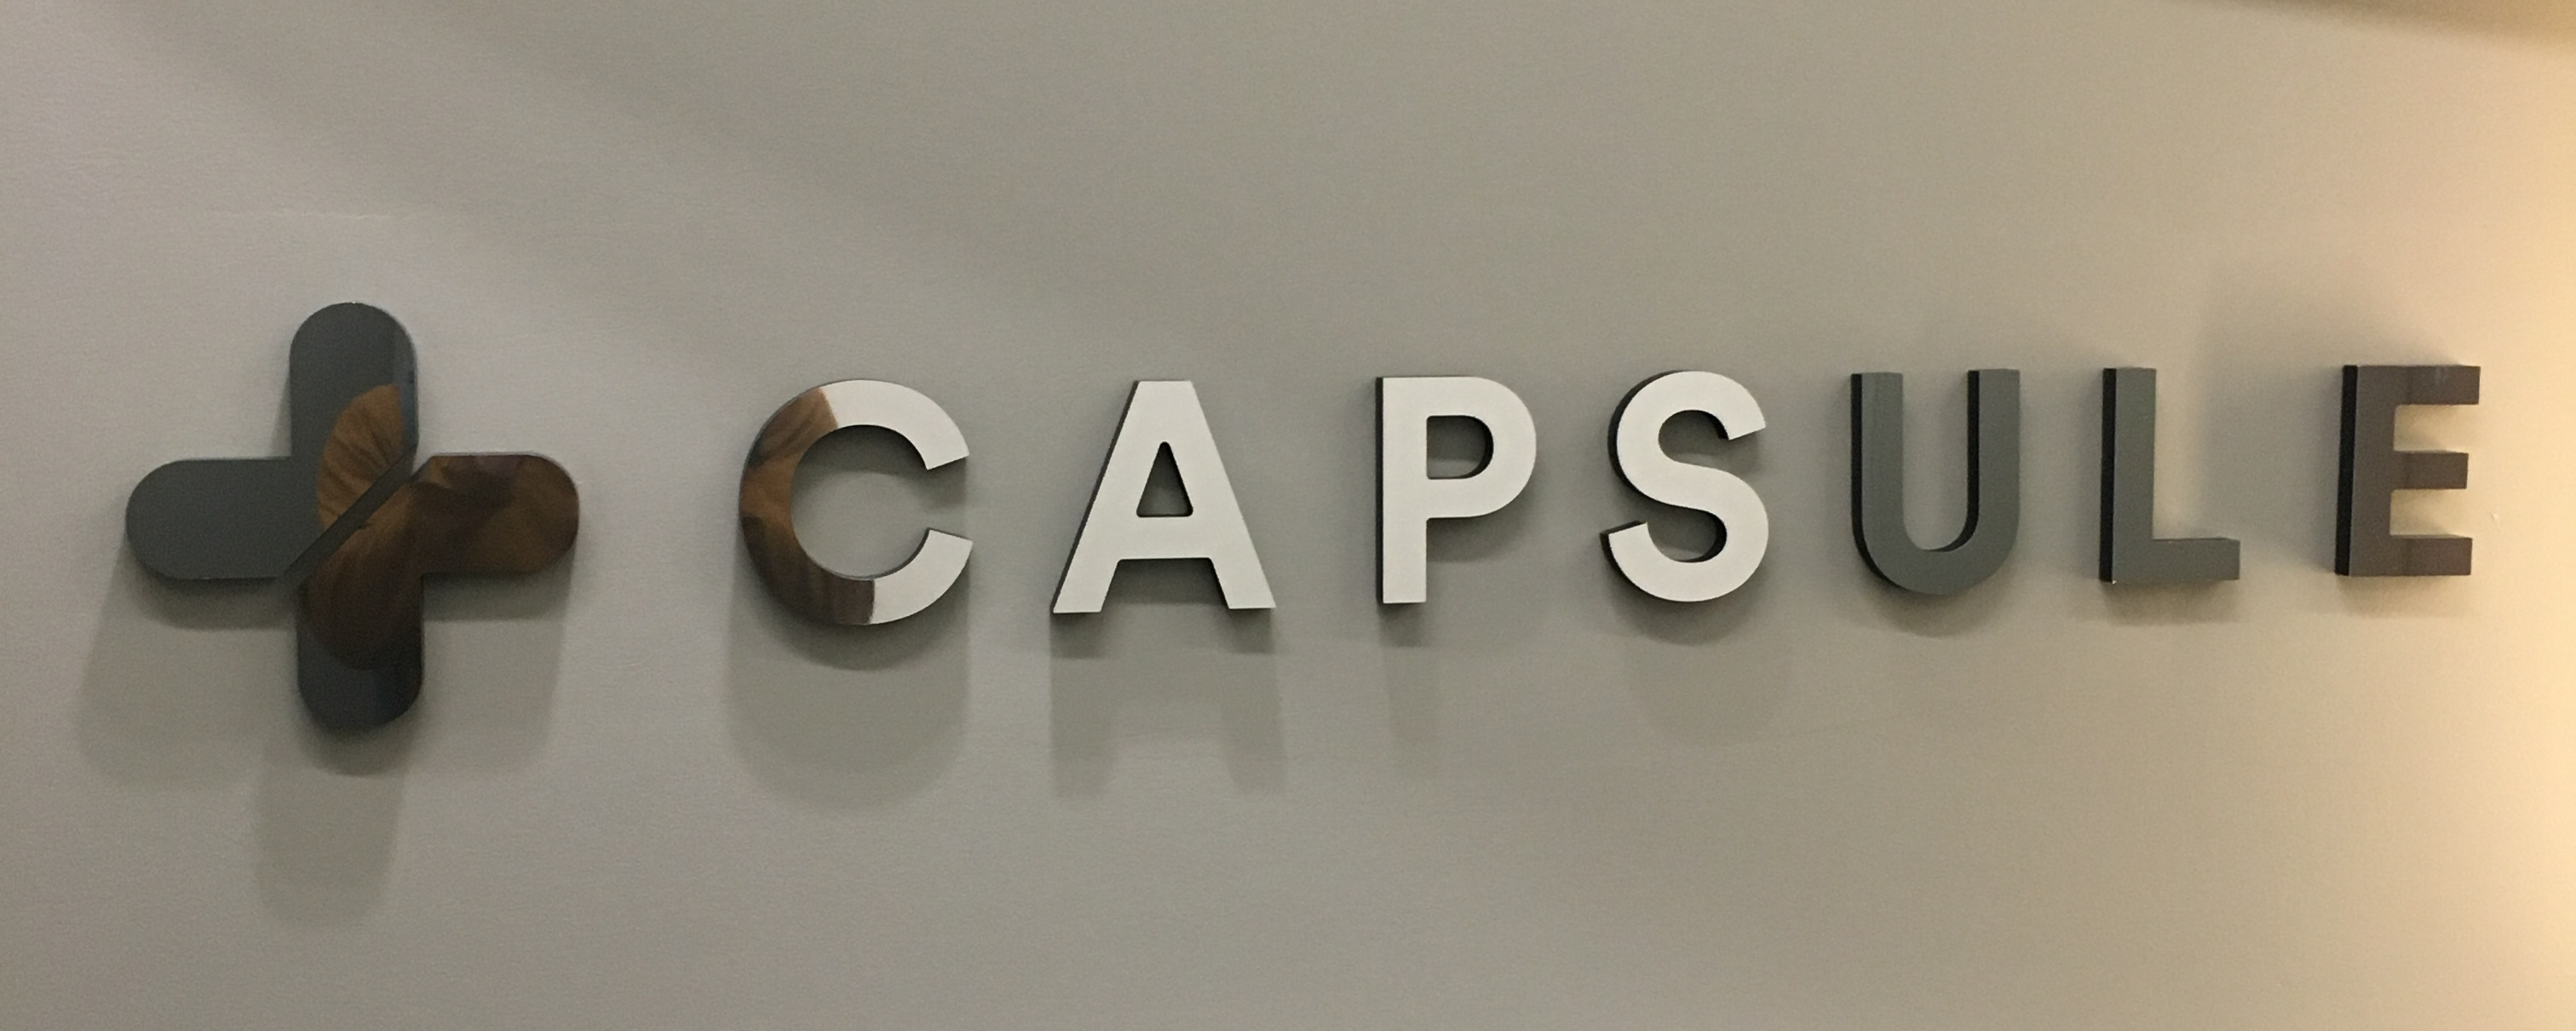 The new capsule office sign